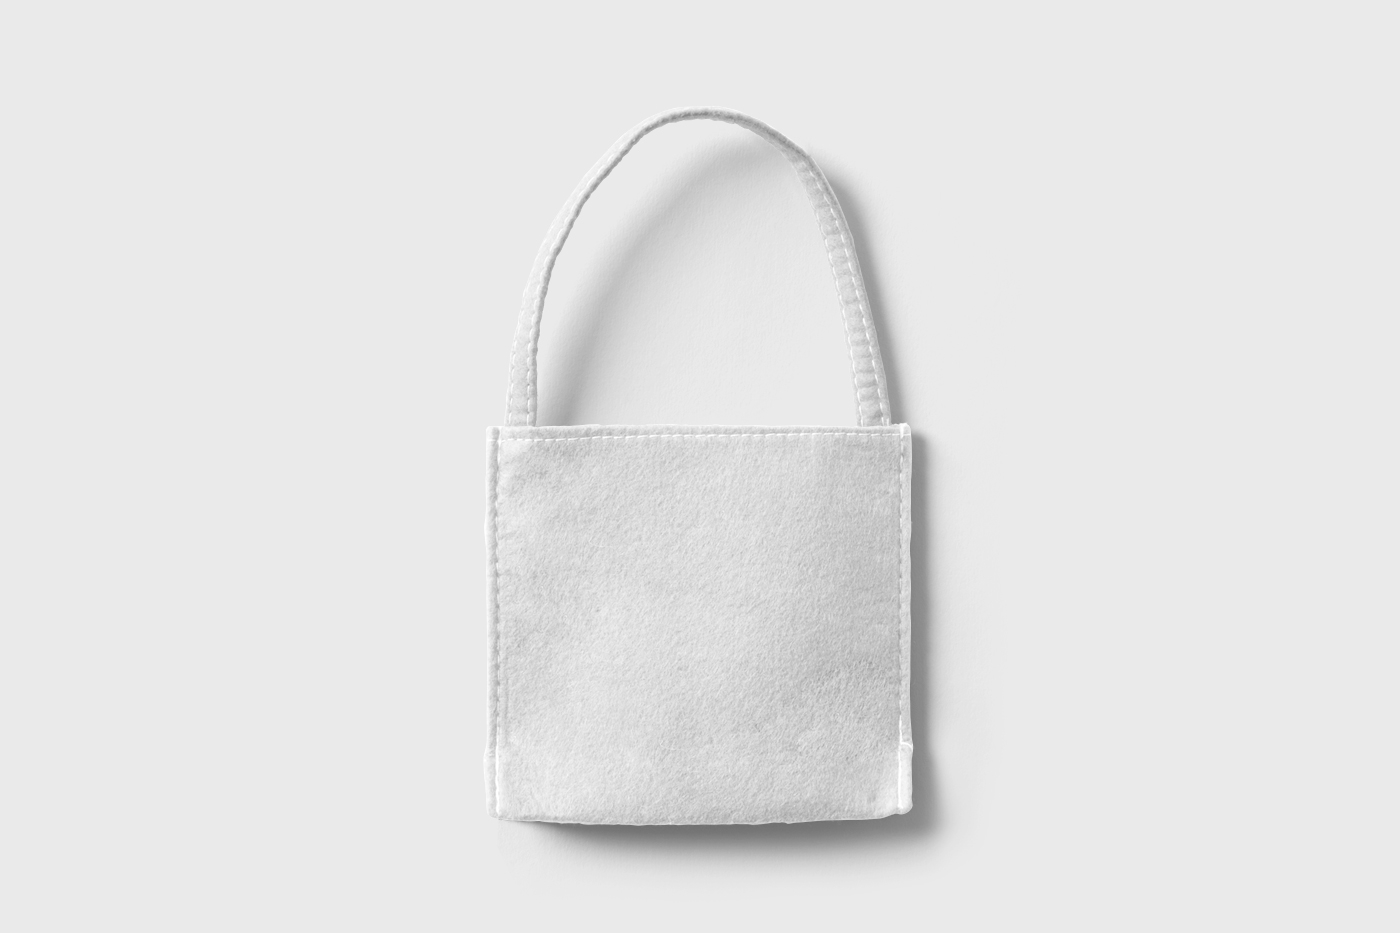 Top View of Two Tote Felt Bags Mockup (FREE) - Resource Boy